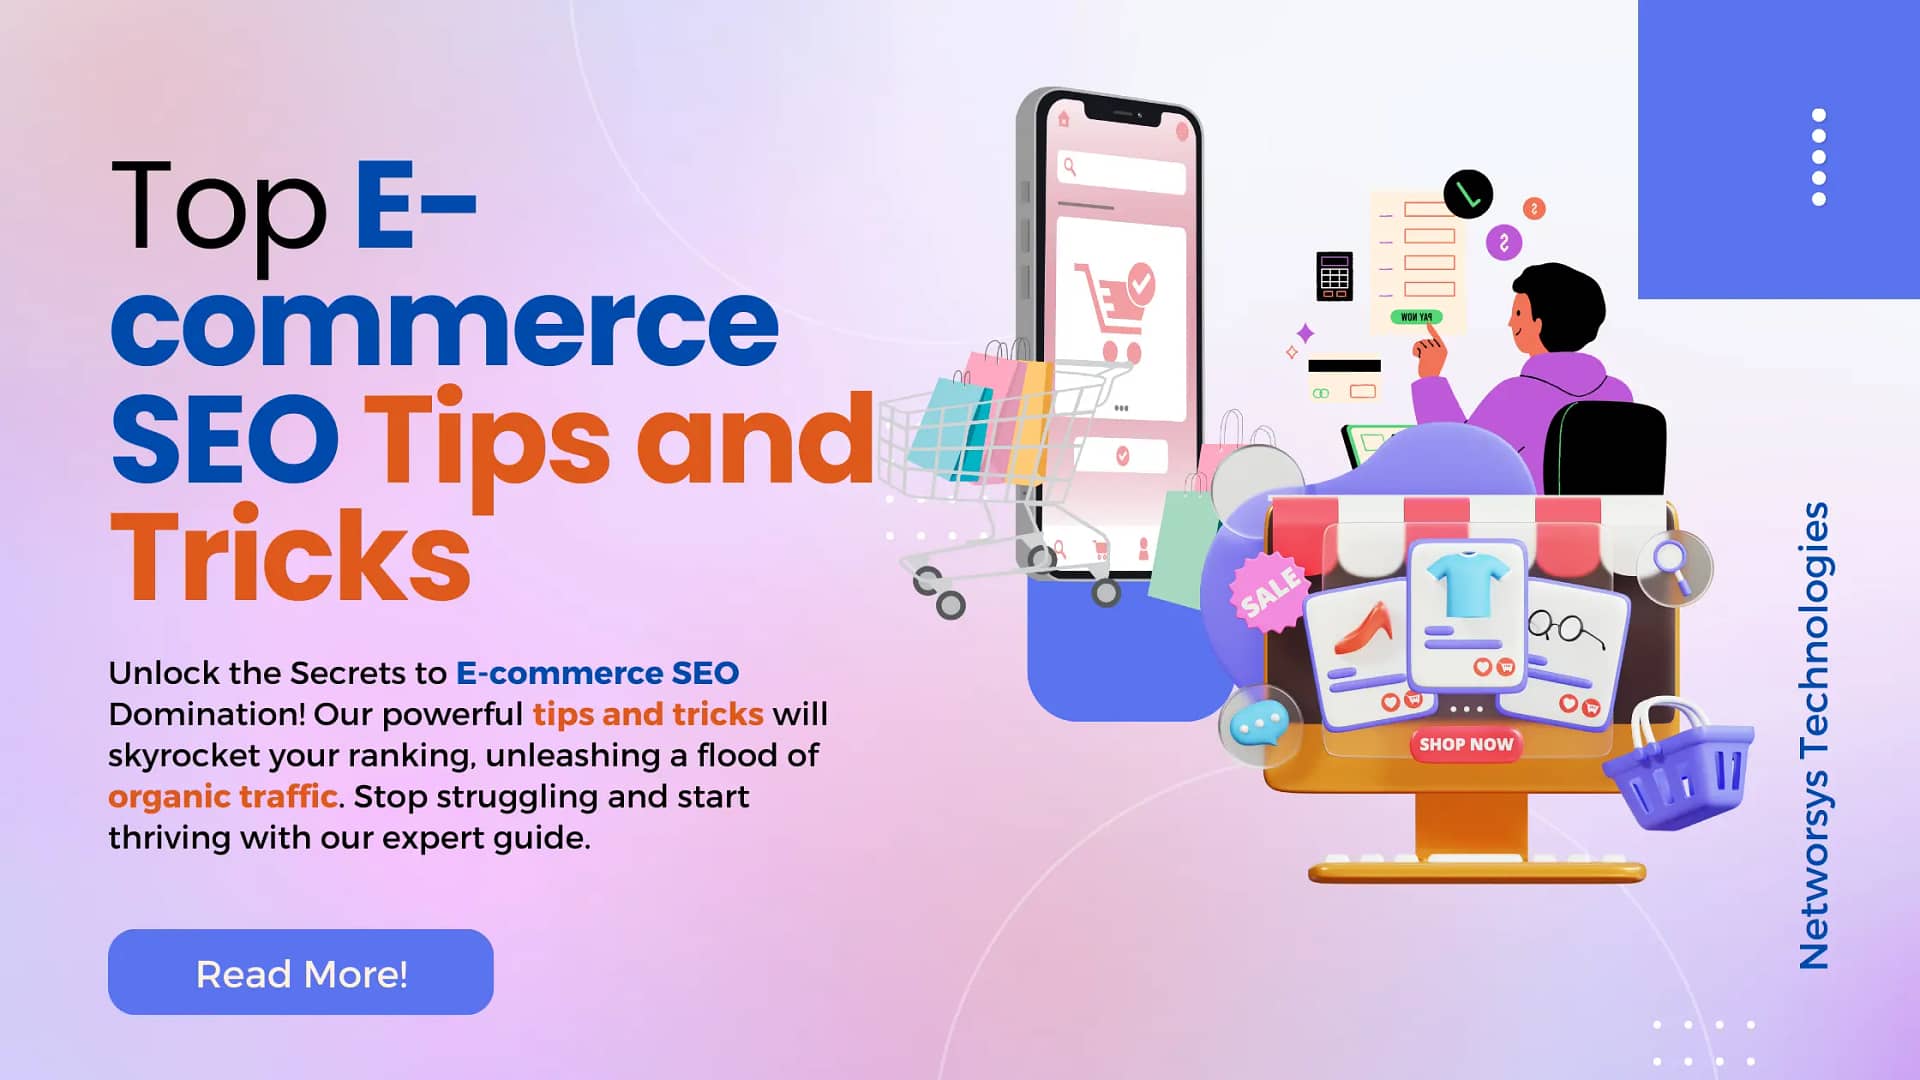 Top E-commerce SEO Tips and Tricks